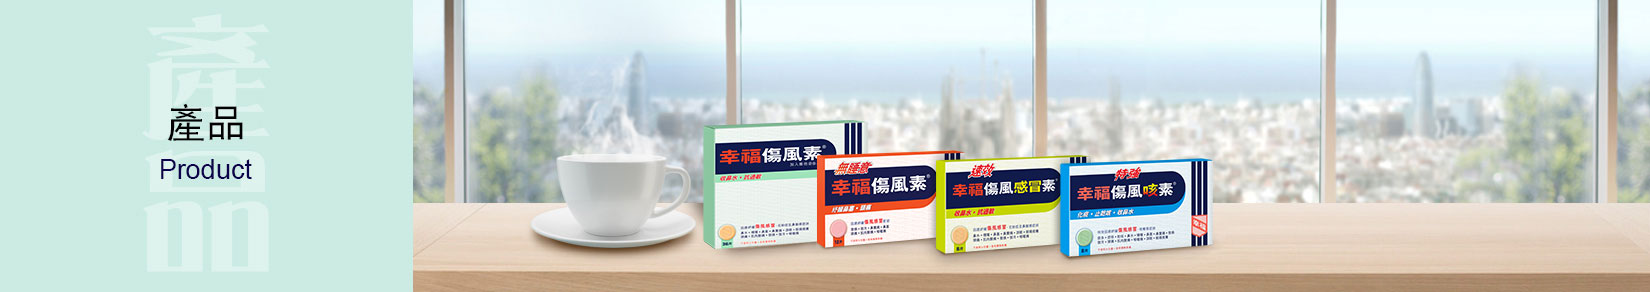 product_banner_YL-product-update-HK_0.jpg 